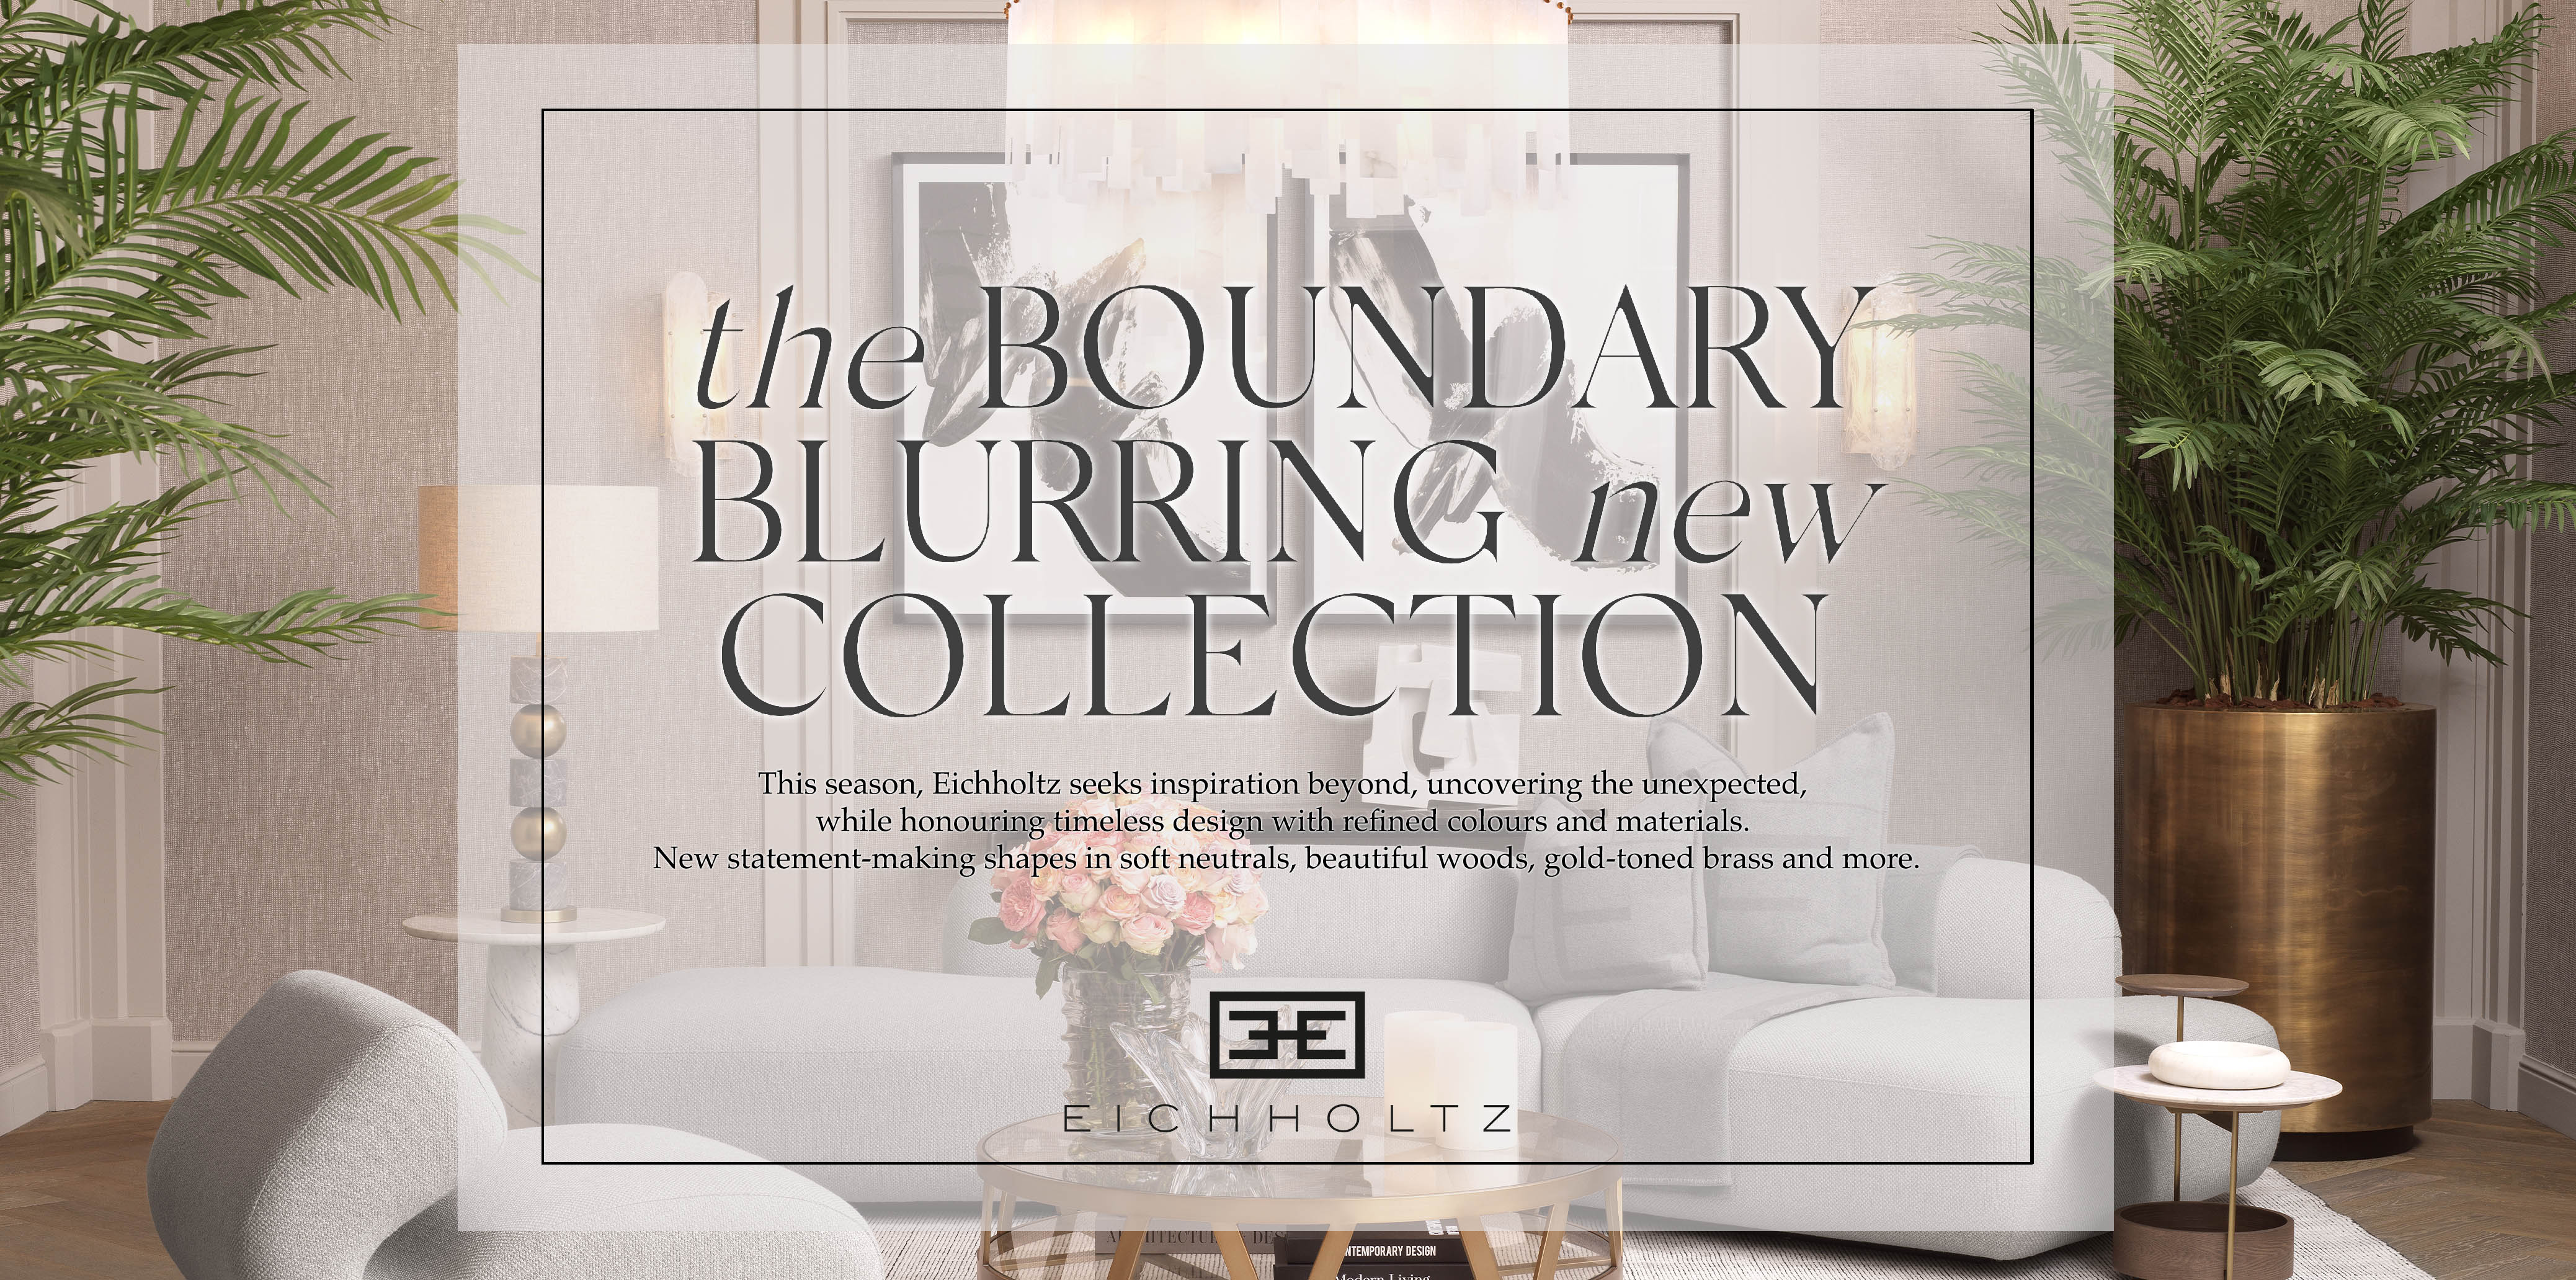 The Boundary Blurring New Collection by Eichholtz